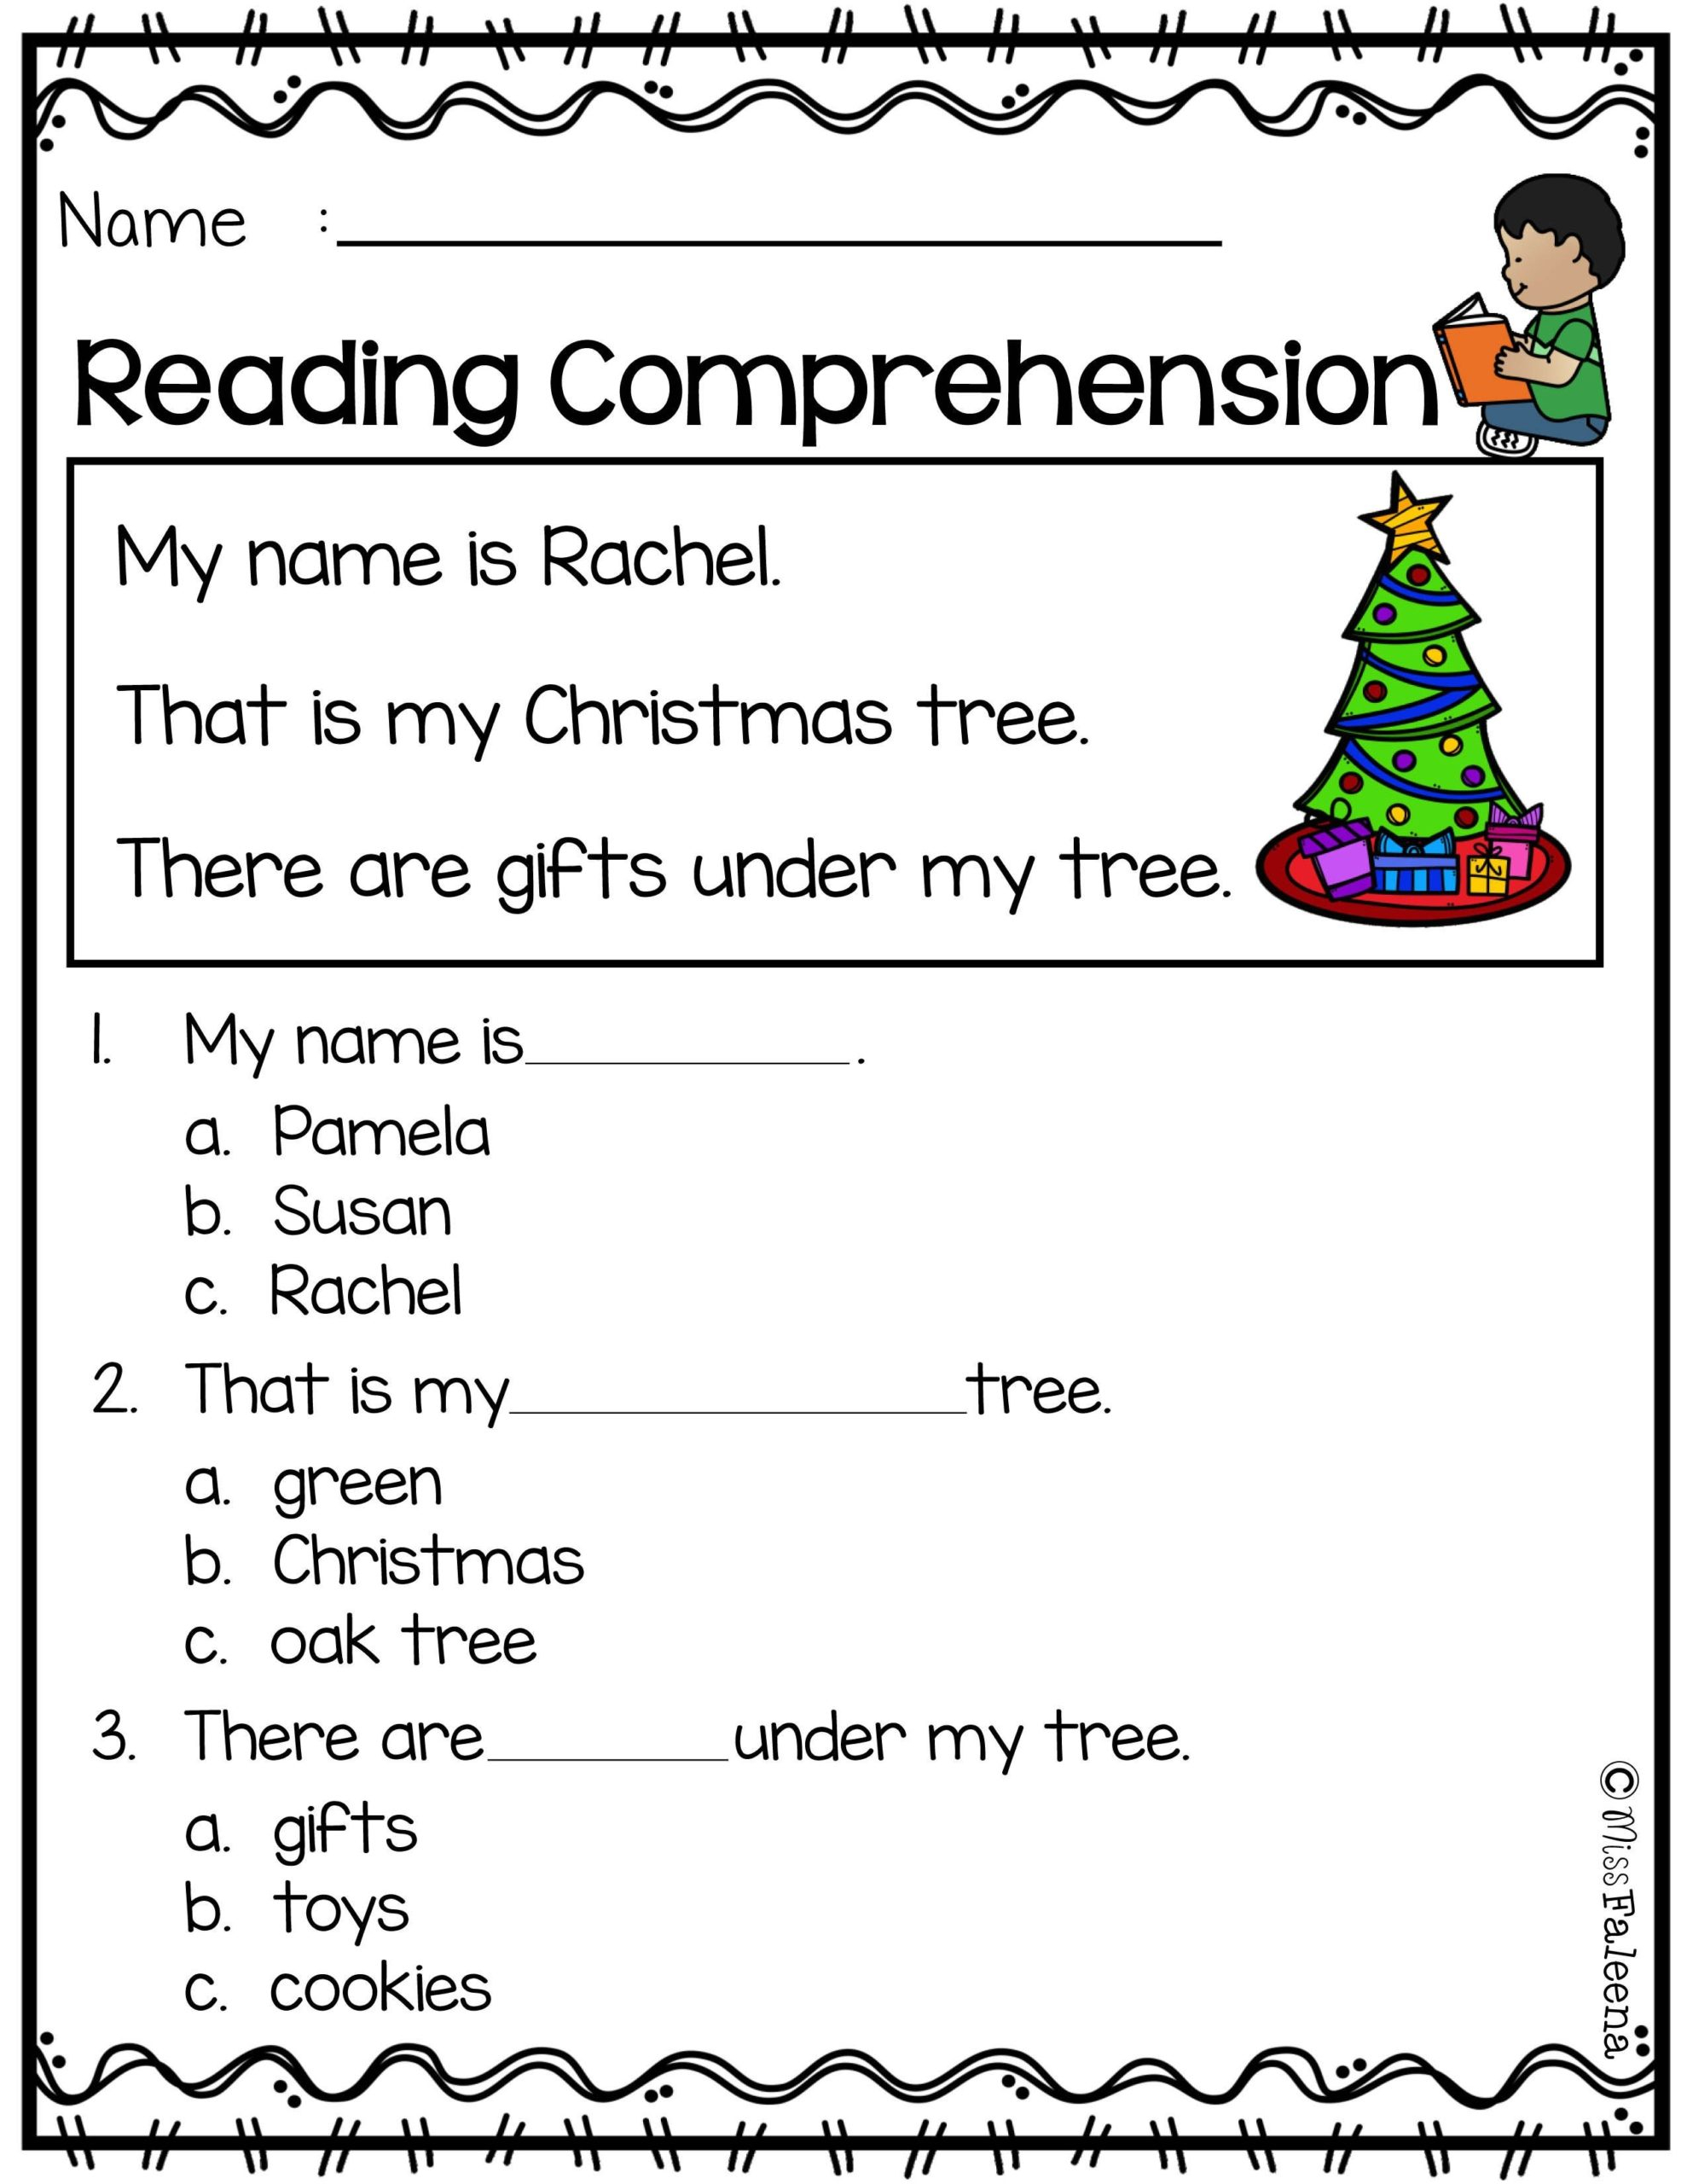 printable-worksheets-for-3rd-grade-grammar-learning-how-english